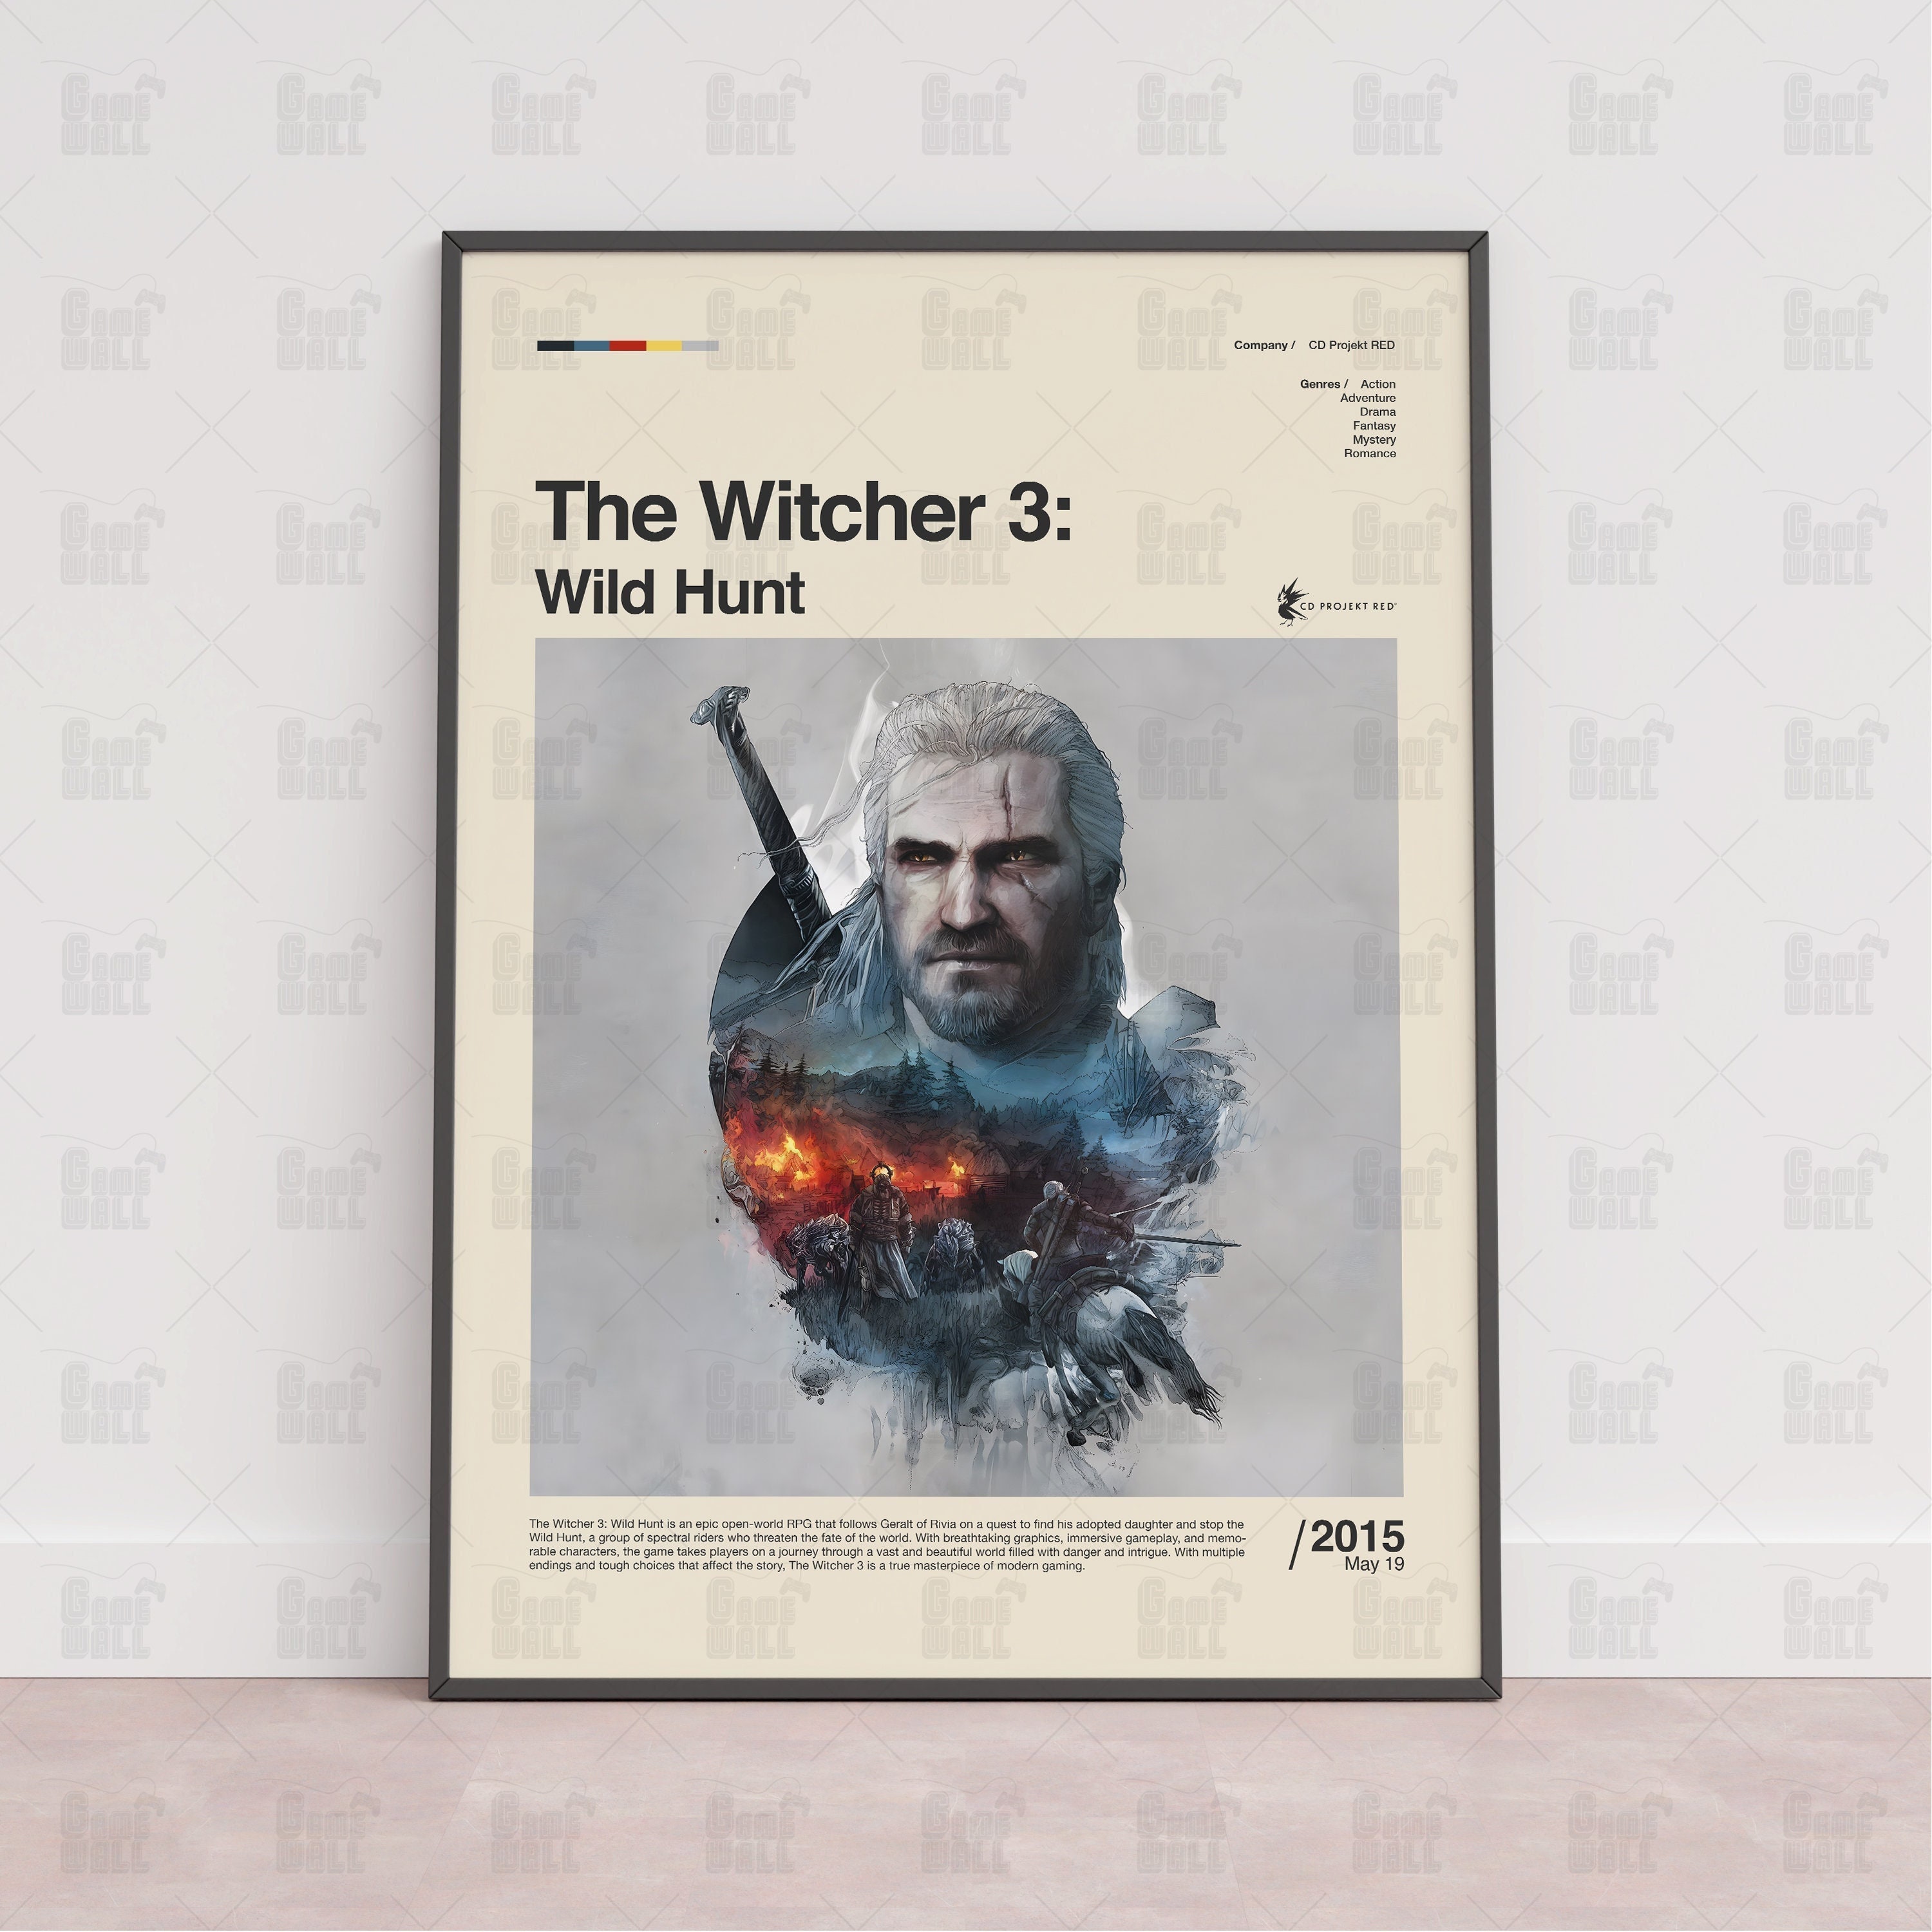 The Witcher 3 Wild Hunt Wall Decoration,Video Game Poster Print,Character  Wall Art,Ciri Wall Decor,Creature Artwork SIZE 24''x32'' (61x81 cm)